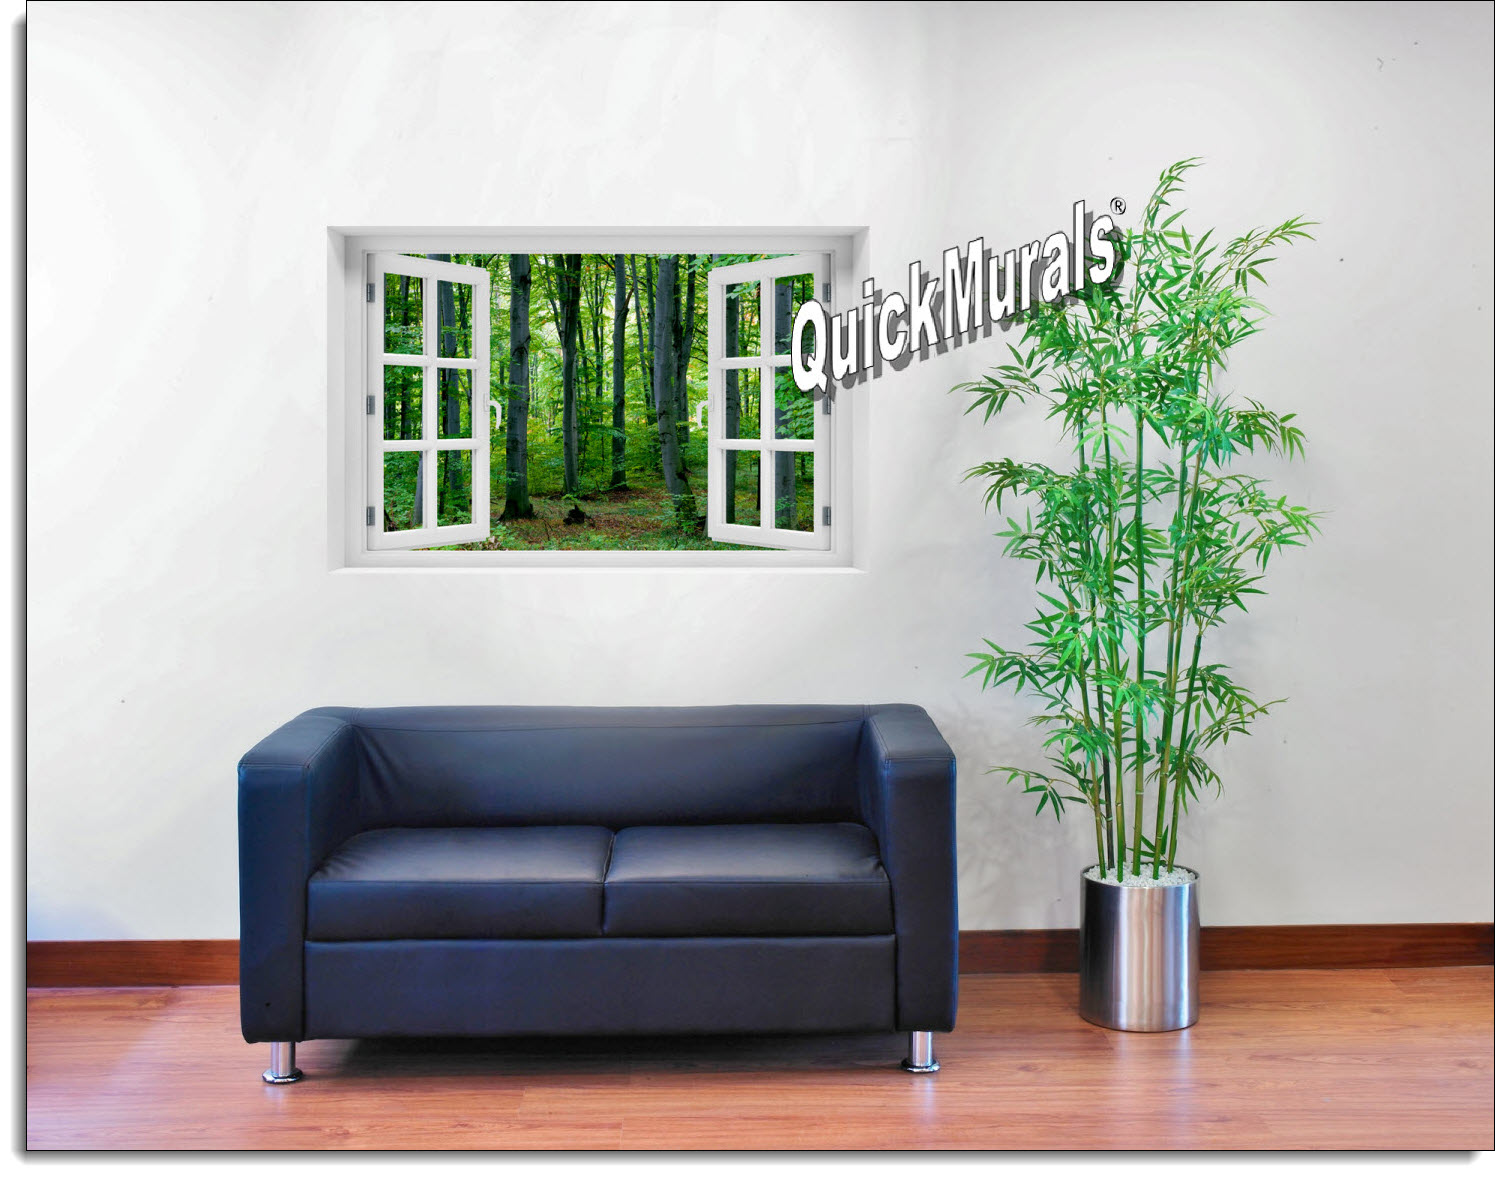 Woodland Forest Window Mural